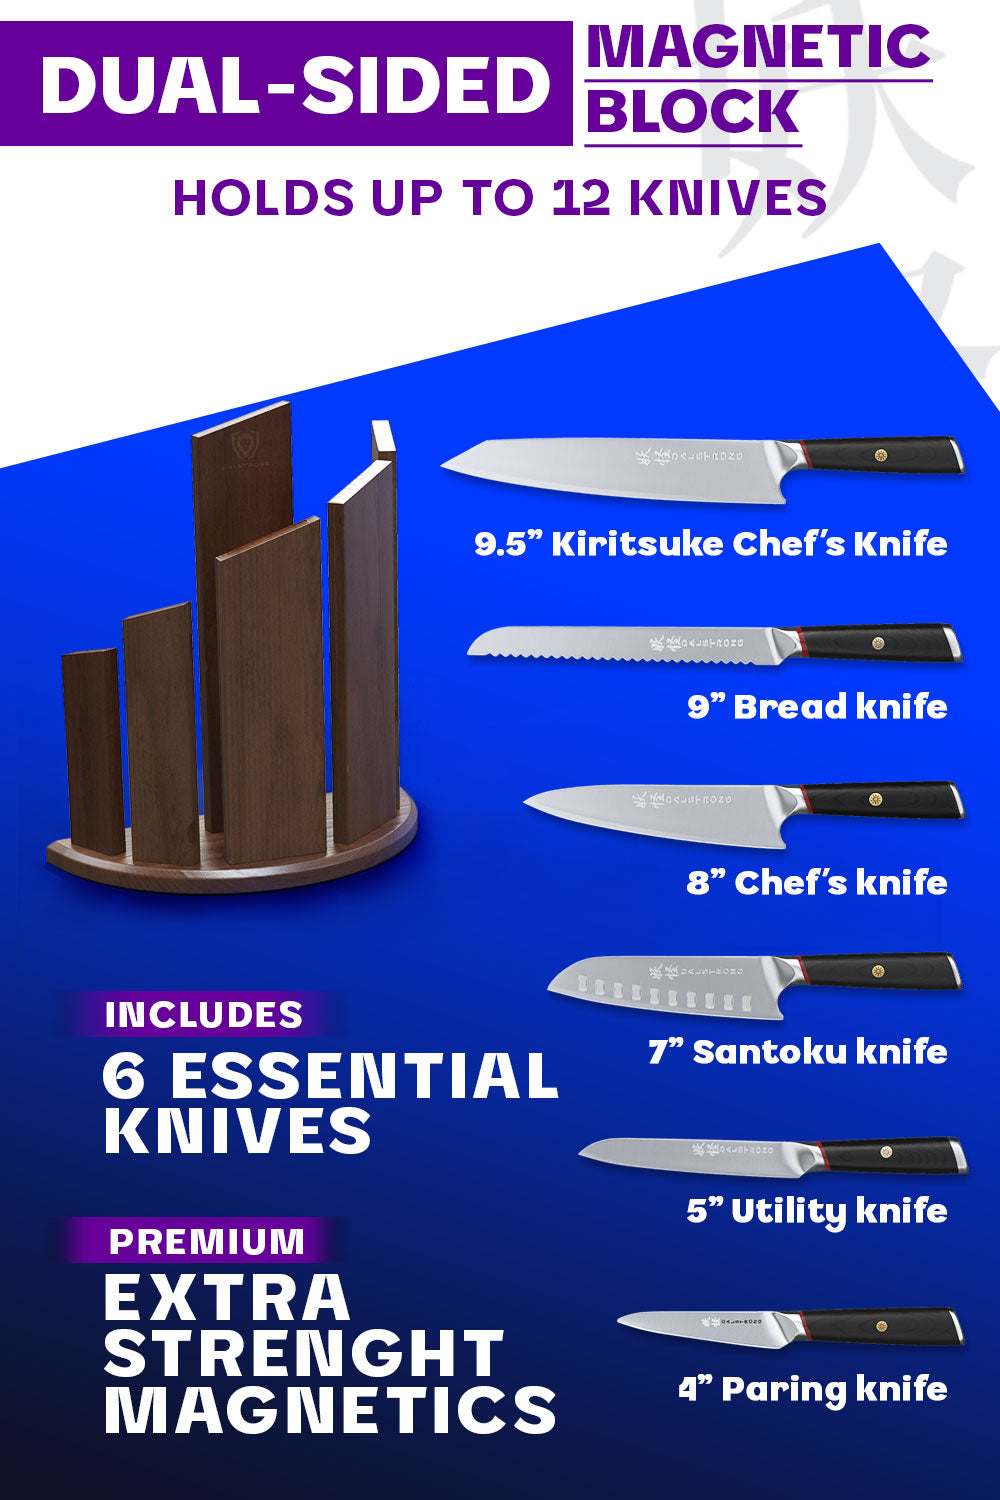 Dalstrong phantom series 6 piece knife set with dragon spire block specification.